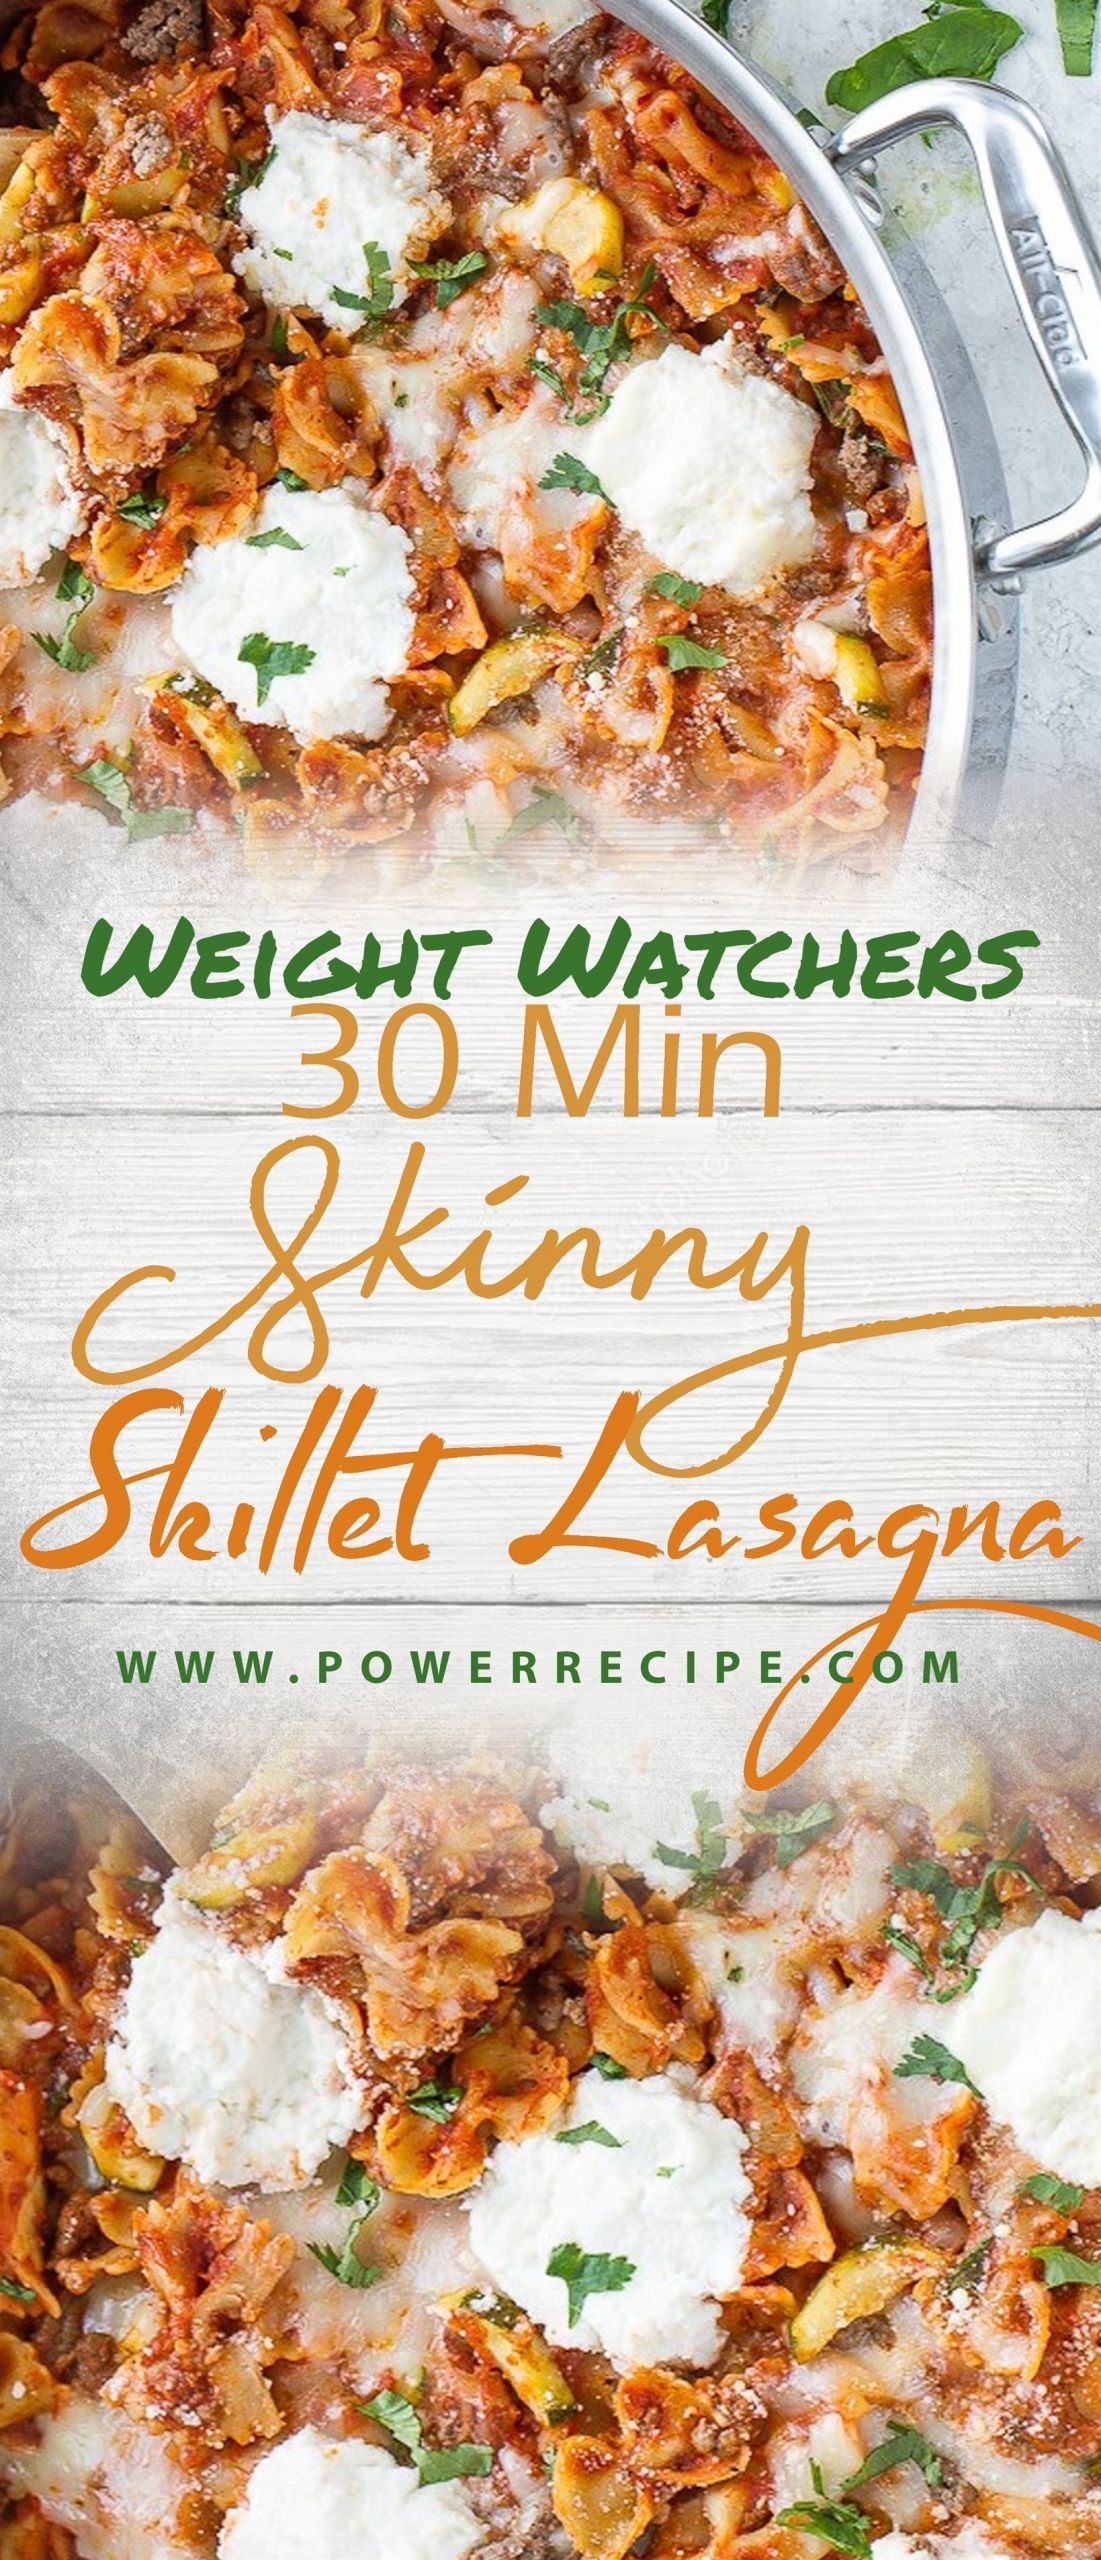 Weight Watcher Slow Cooker Lasagna
 Slow Cooker Lasagna Soup All about Your Power Recipes